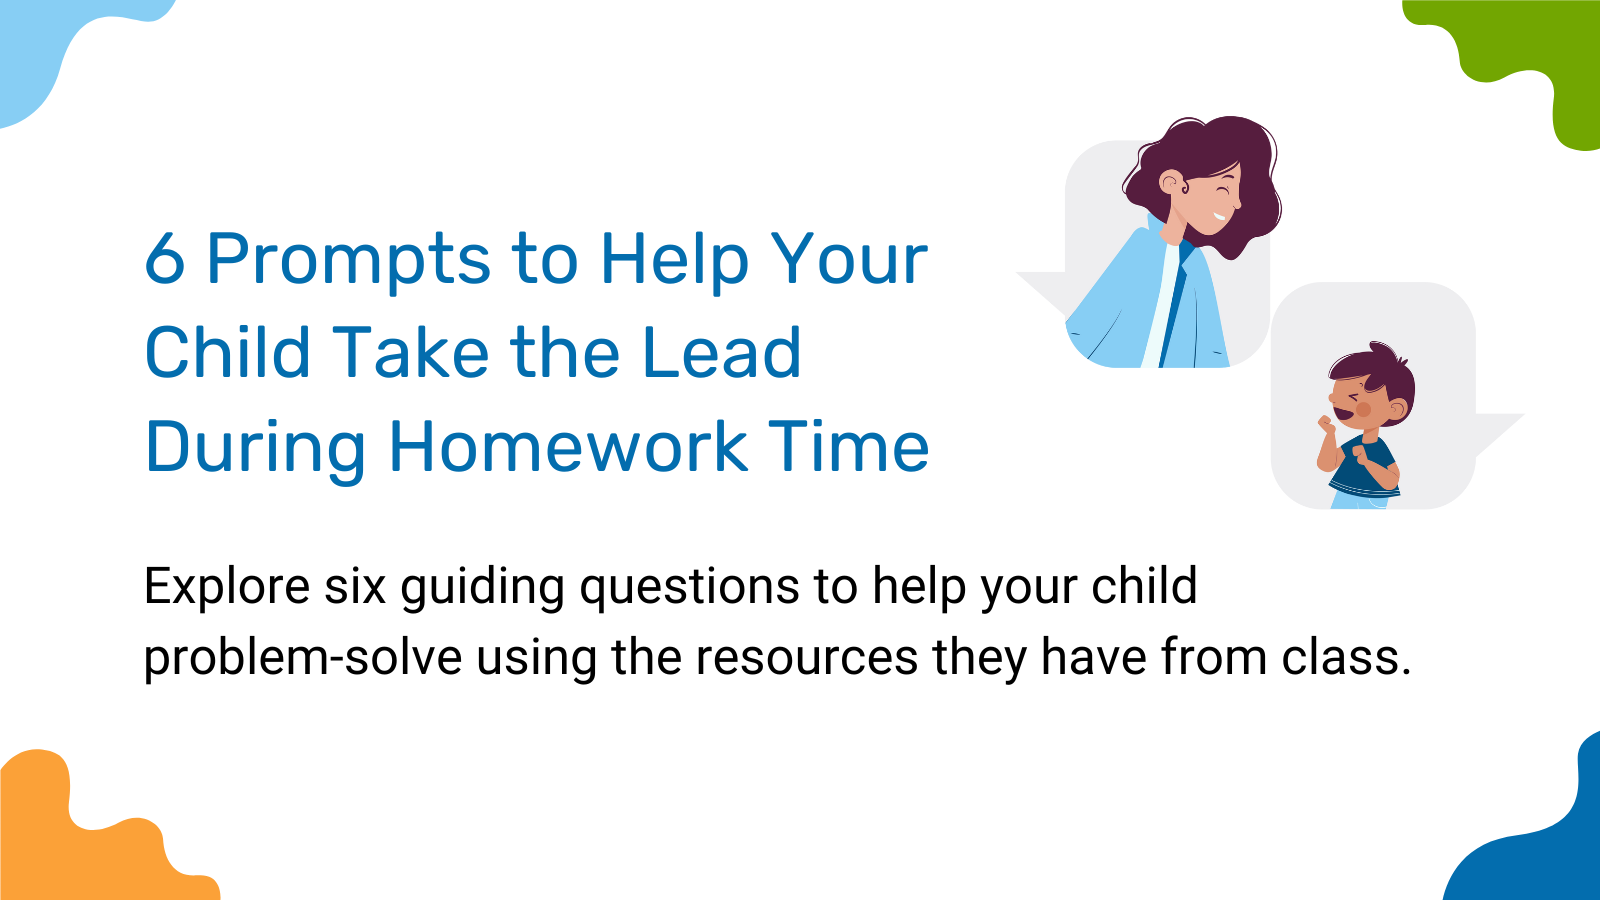 6 Prompts to Help Your Child Take the Lead During Homework Time